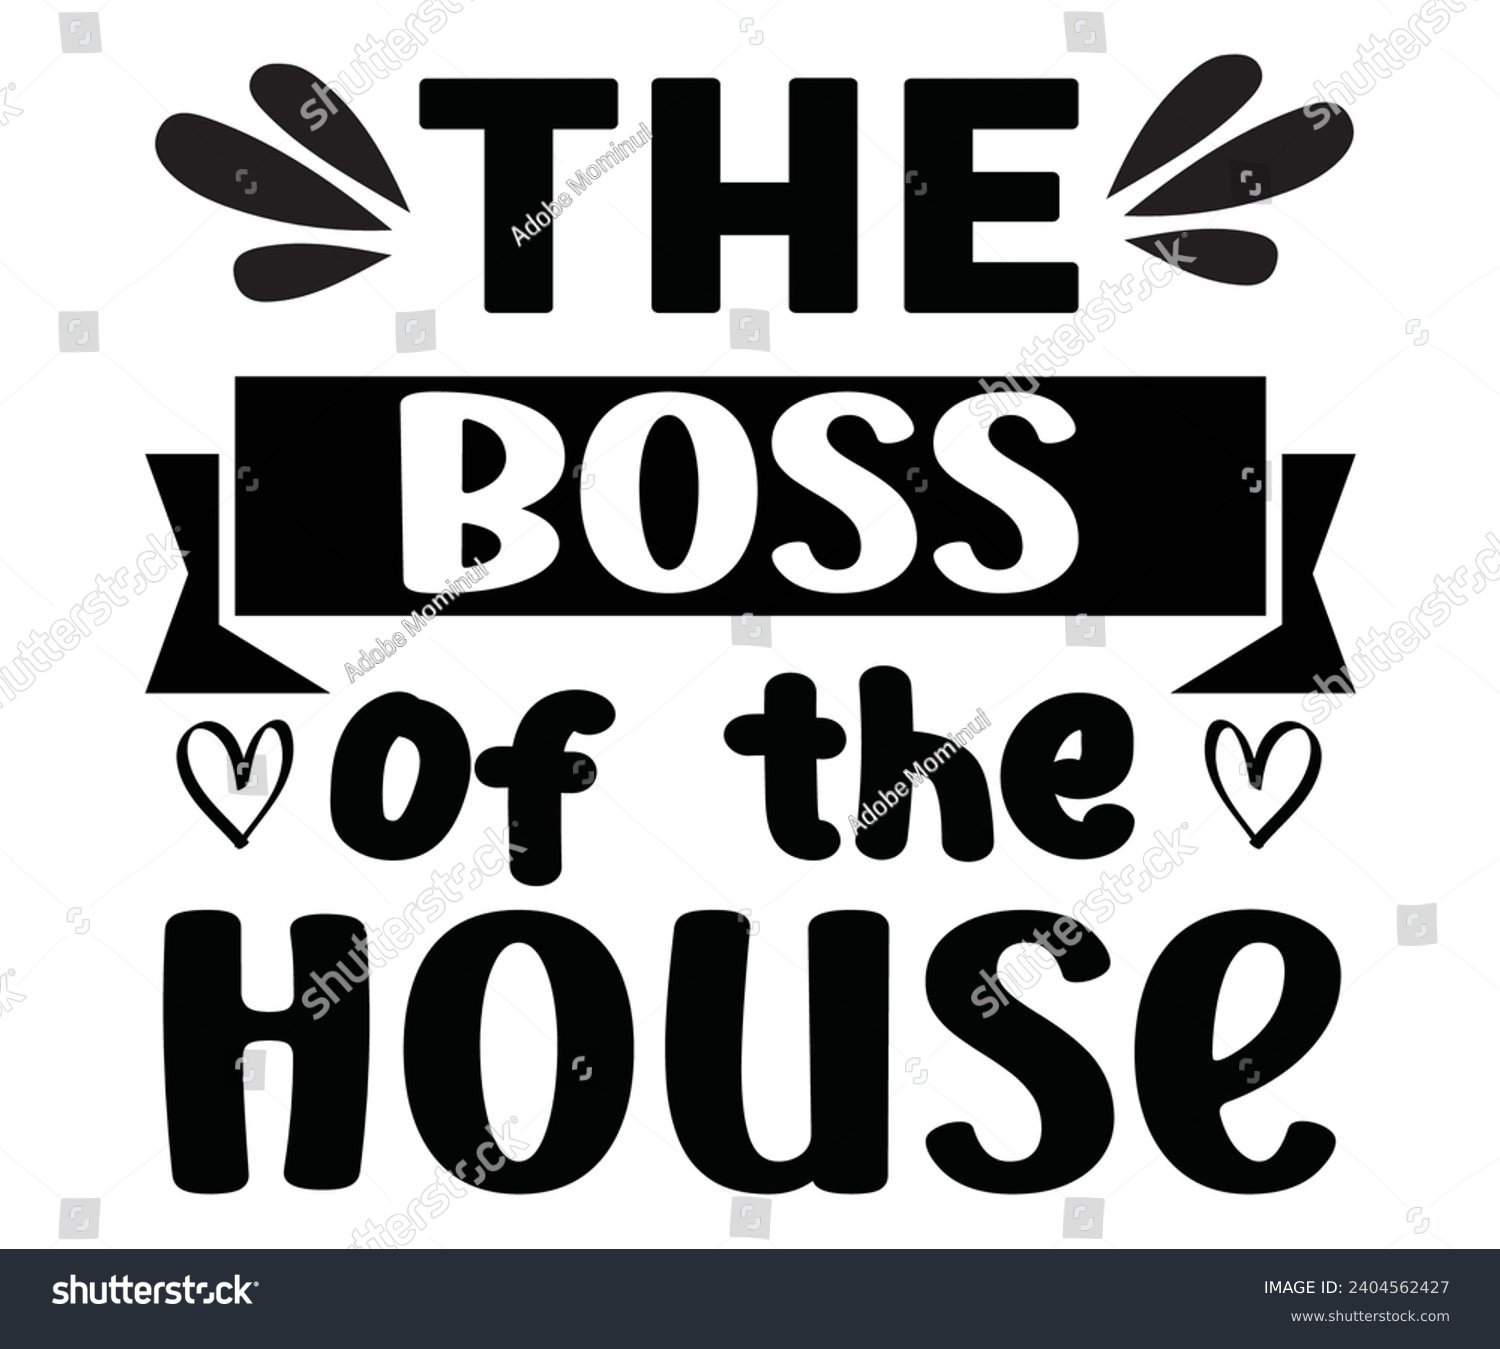 SVG of The Boss of the House Svg,Happy Boss Day svg,Boss Saying Quotes,Boss Day T-shirt,Gift for Boss,Great Jobs,Happy Bosses Day t-shirt,Girl Boss Shirt,Motivational Boss,Cut File,Circut And Silhouette, svg